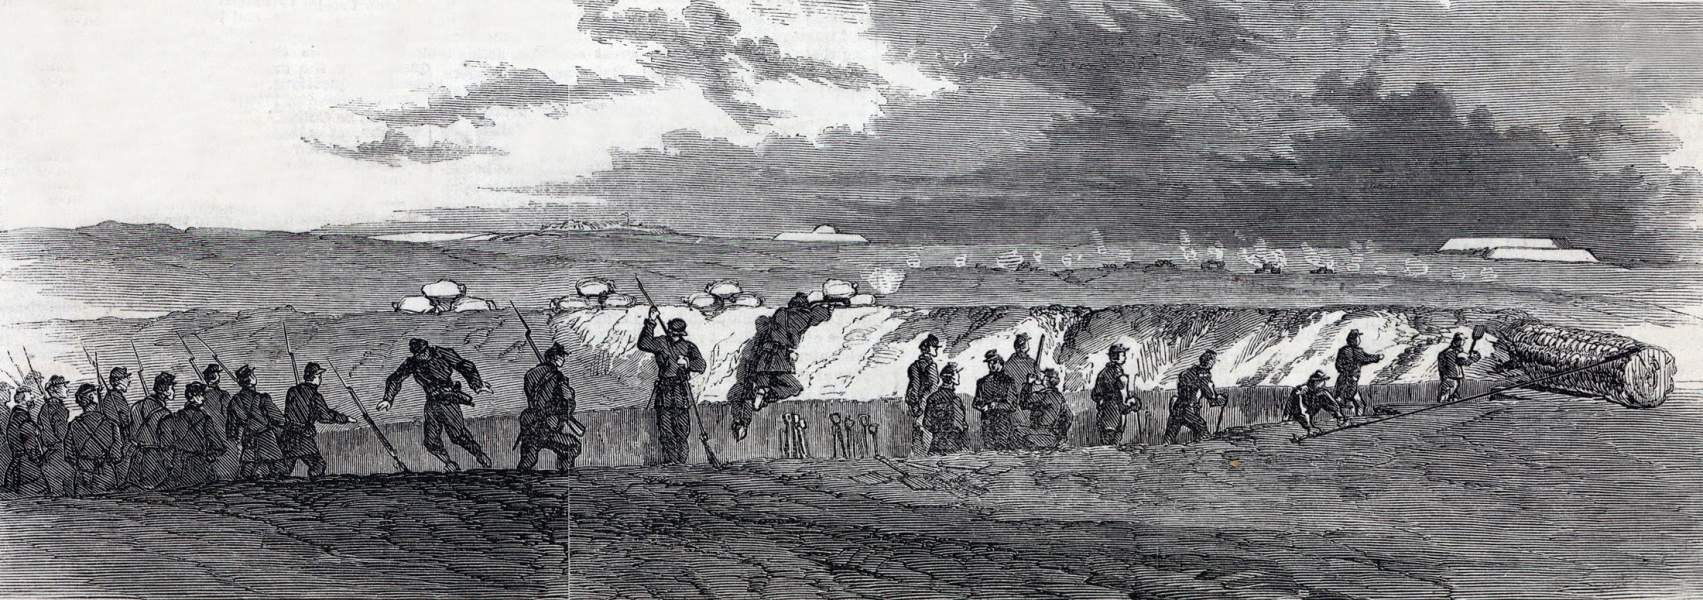 Union Army Engineers in the works before Fort Wagner, South Carolina, September 1863, artist's impression, zoomable image